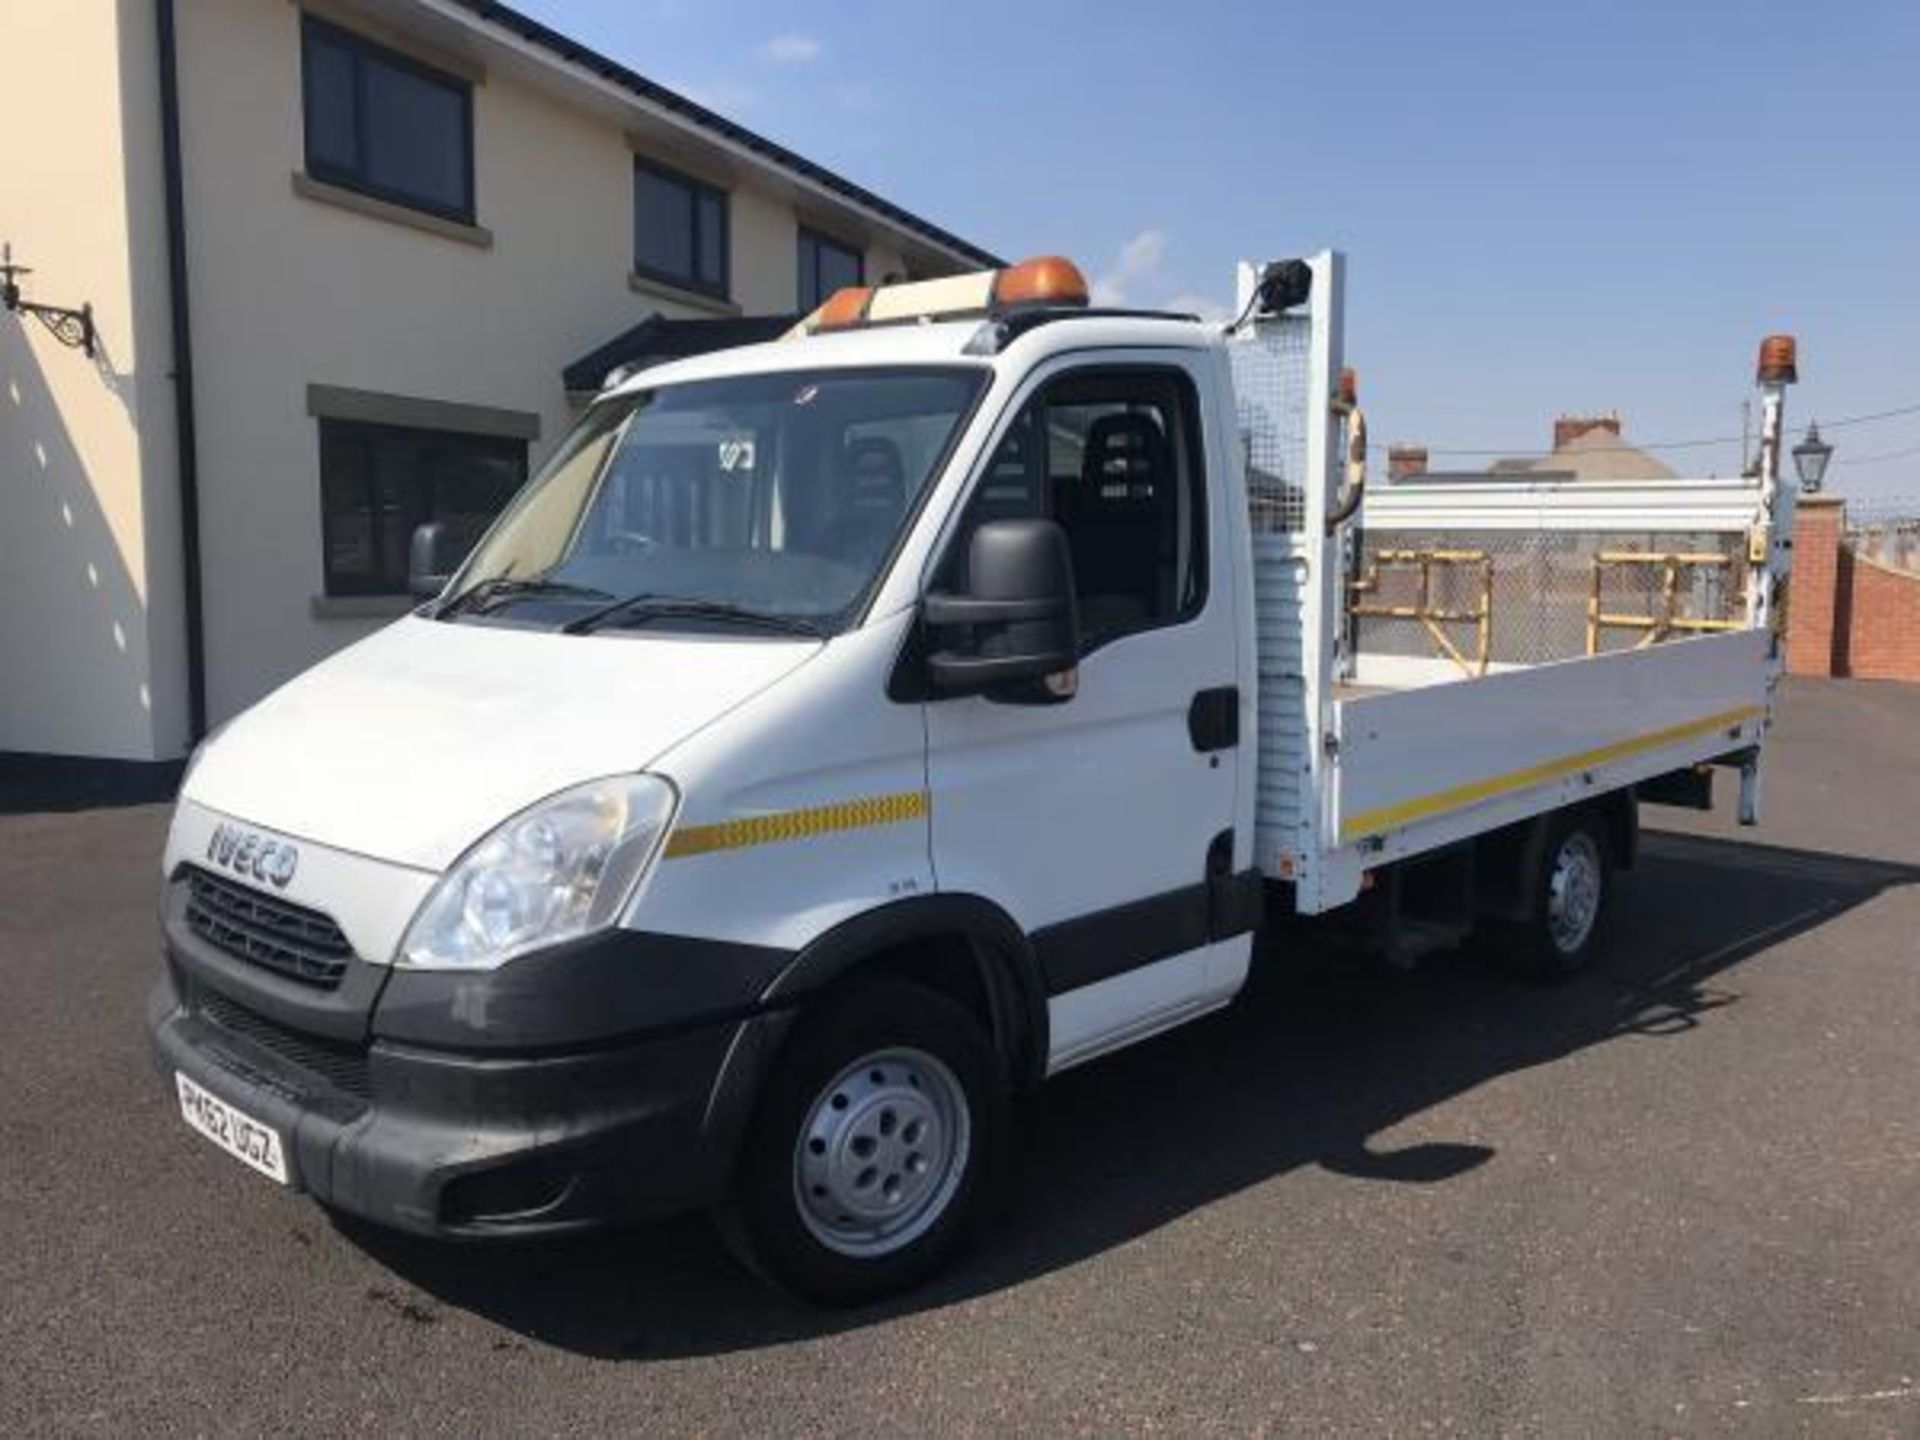 2012/62 REG IVECO DAILY 35S13 MWB ALLOY DROP SIDE TRUCK WITH TAIL LIFT, SHOWING 0 FORMER KEEPERS - Image 2 of 6